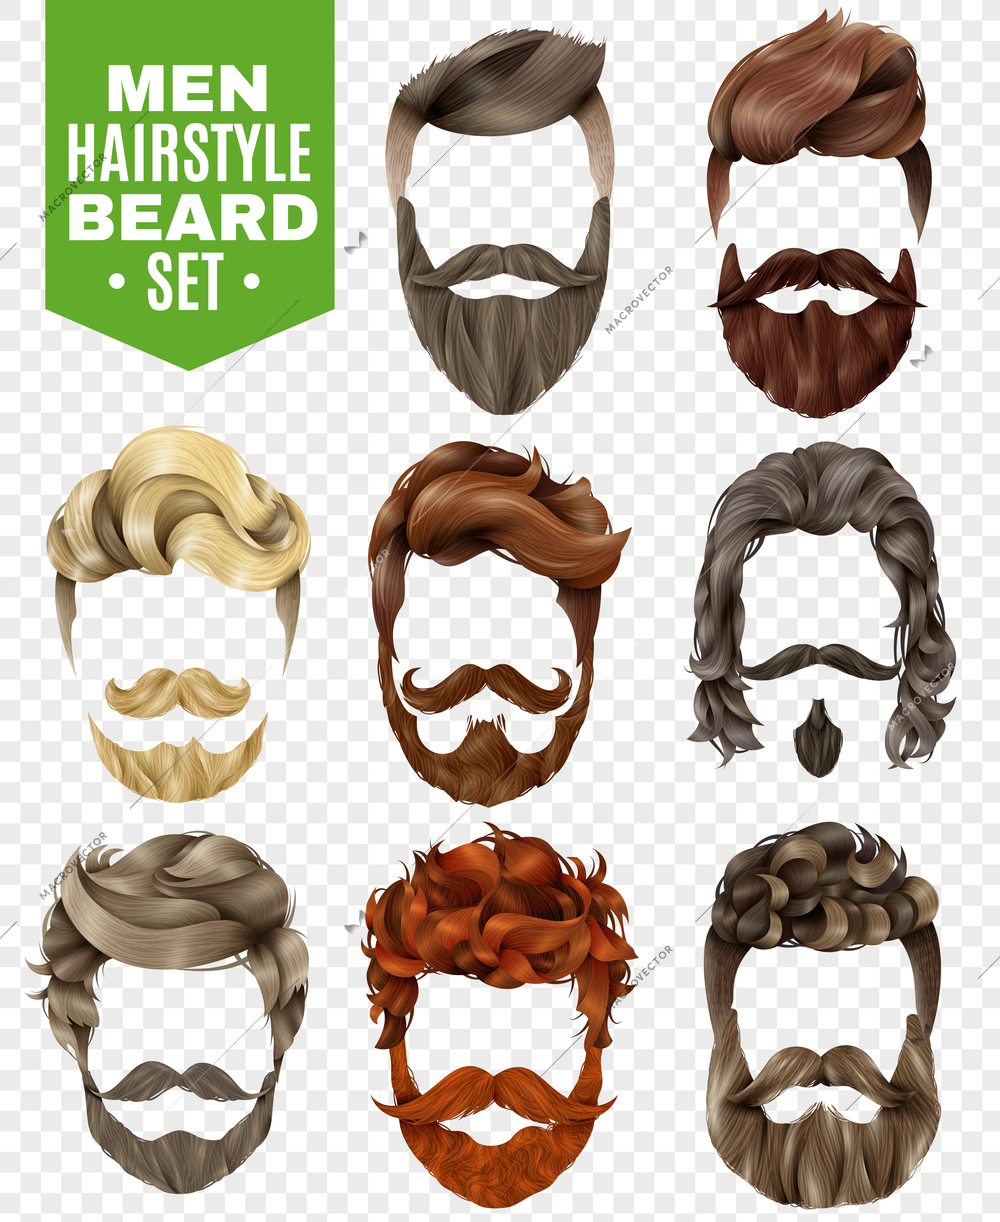 Realistic set of modern styles for male hair and beard of various colors isolated on white background vector illustration